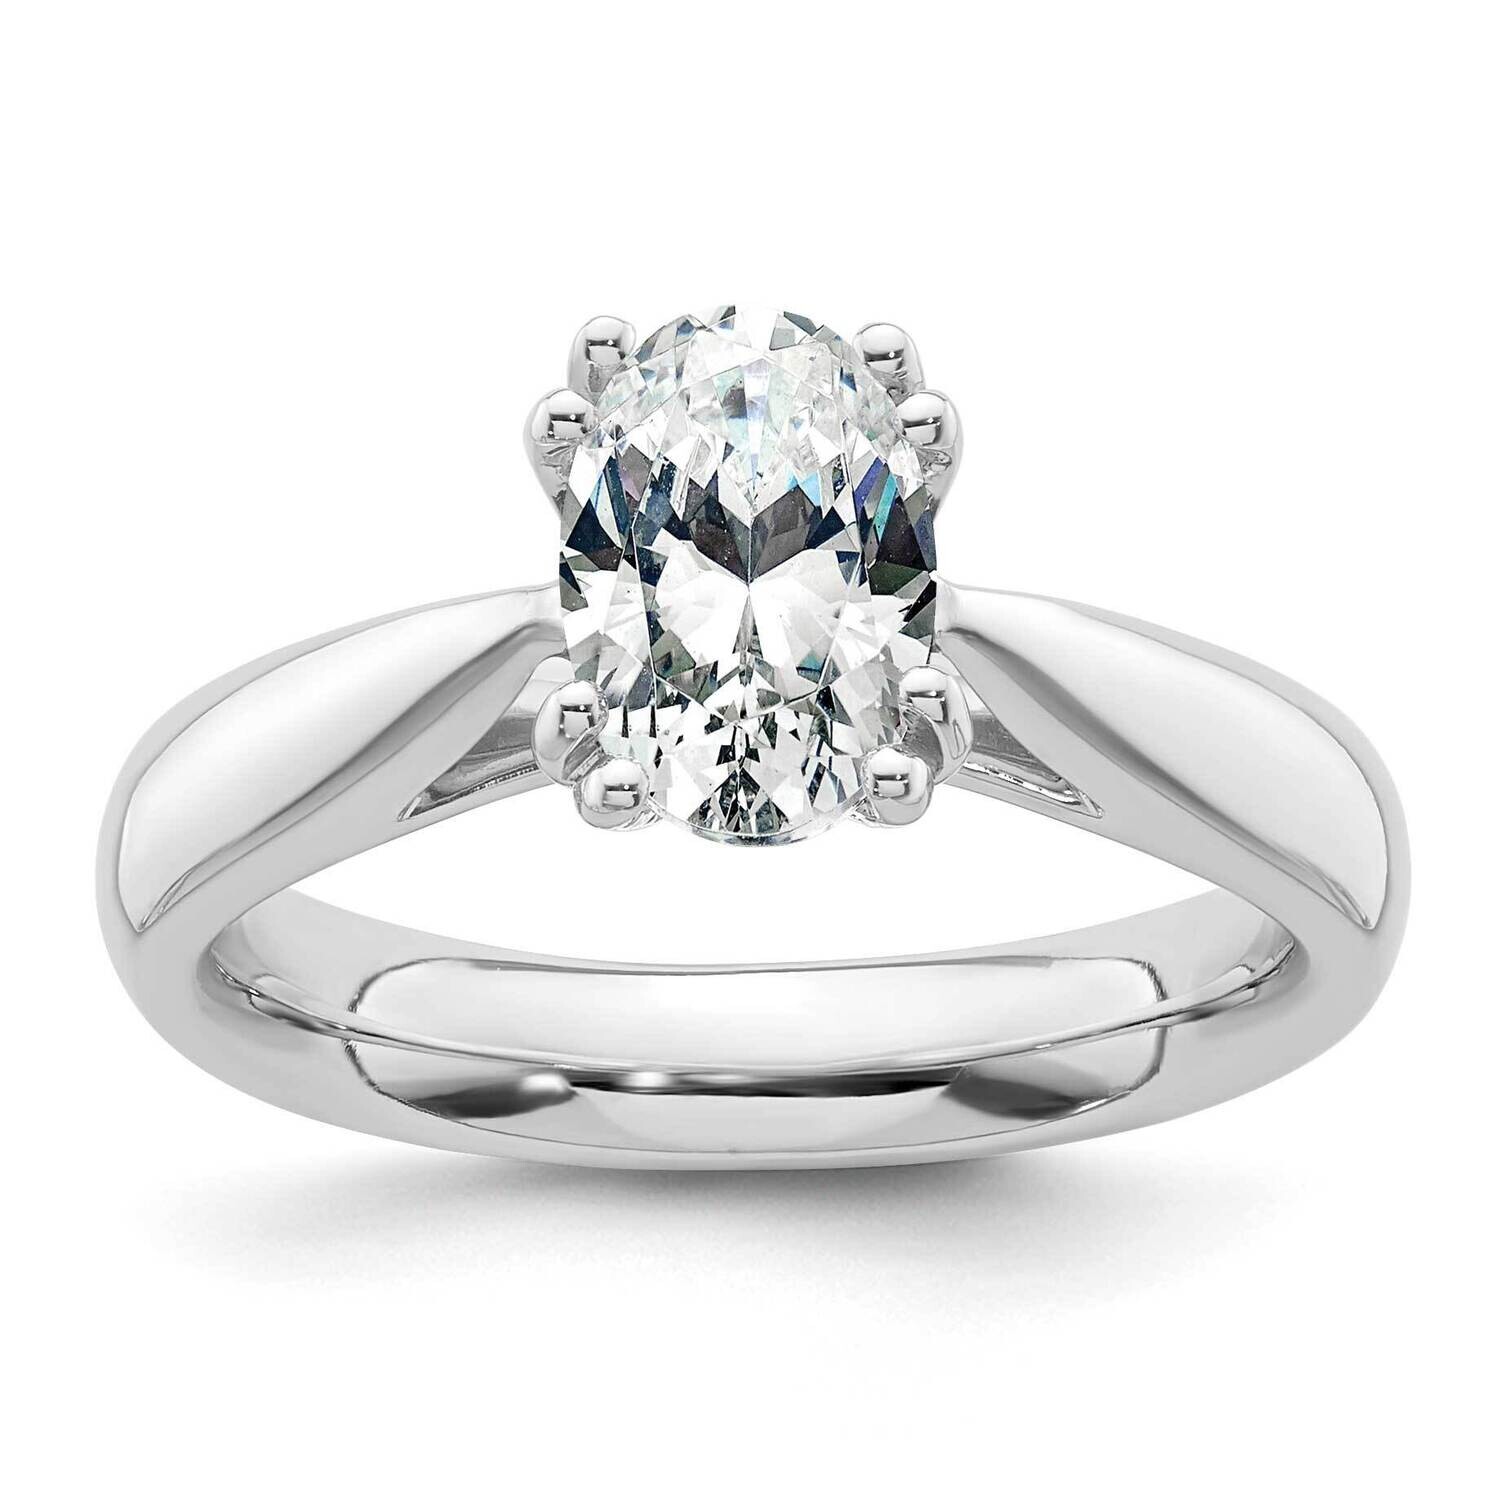 2 Carat 8.5X6.5mm 4-Prong Oval Solitaire Engagement Ring Mounting 14k White Gold RM1965E-200-CWAA